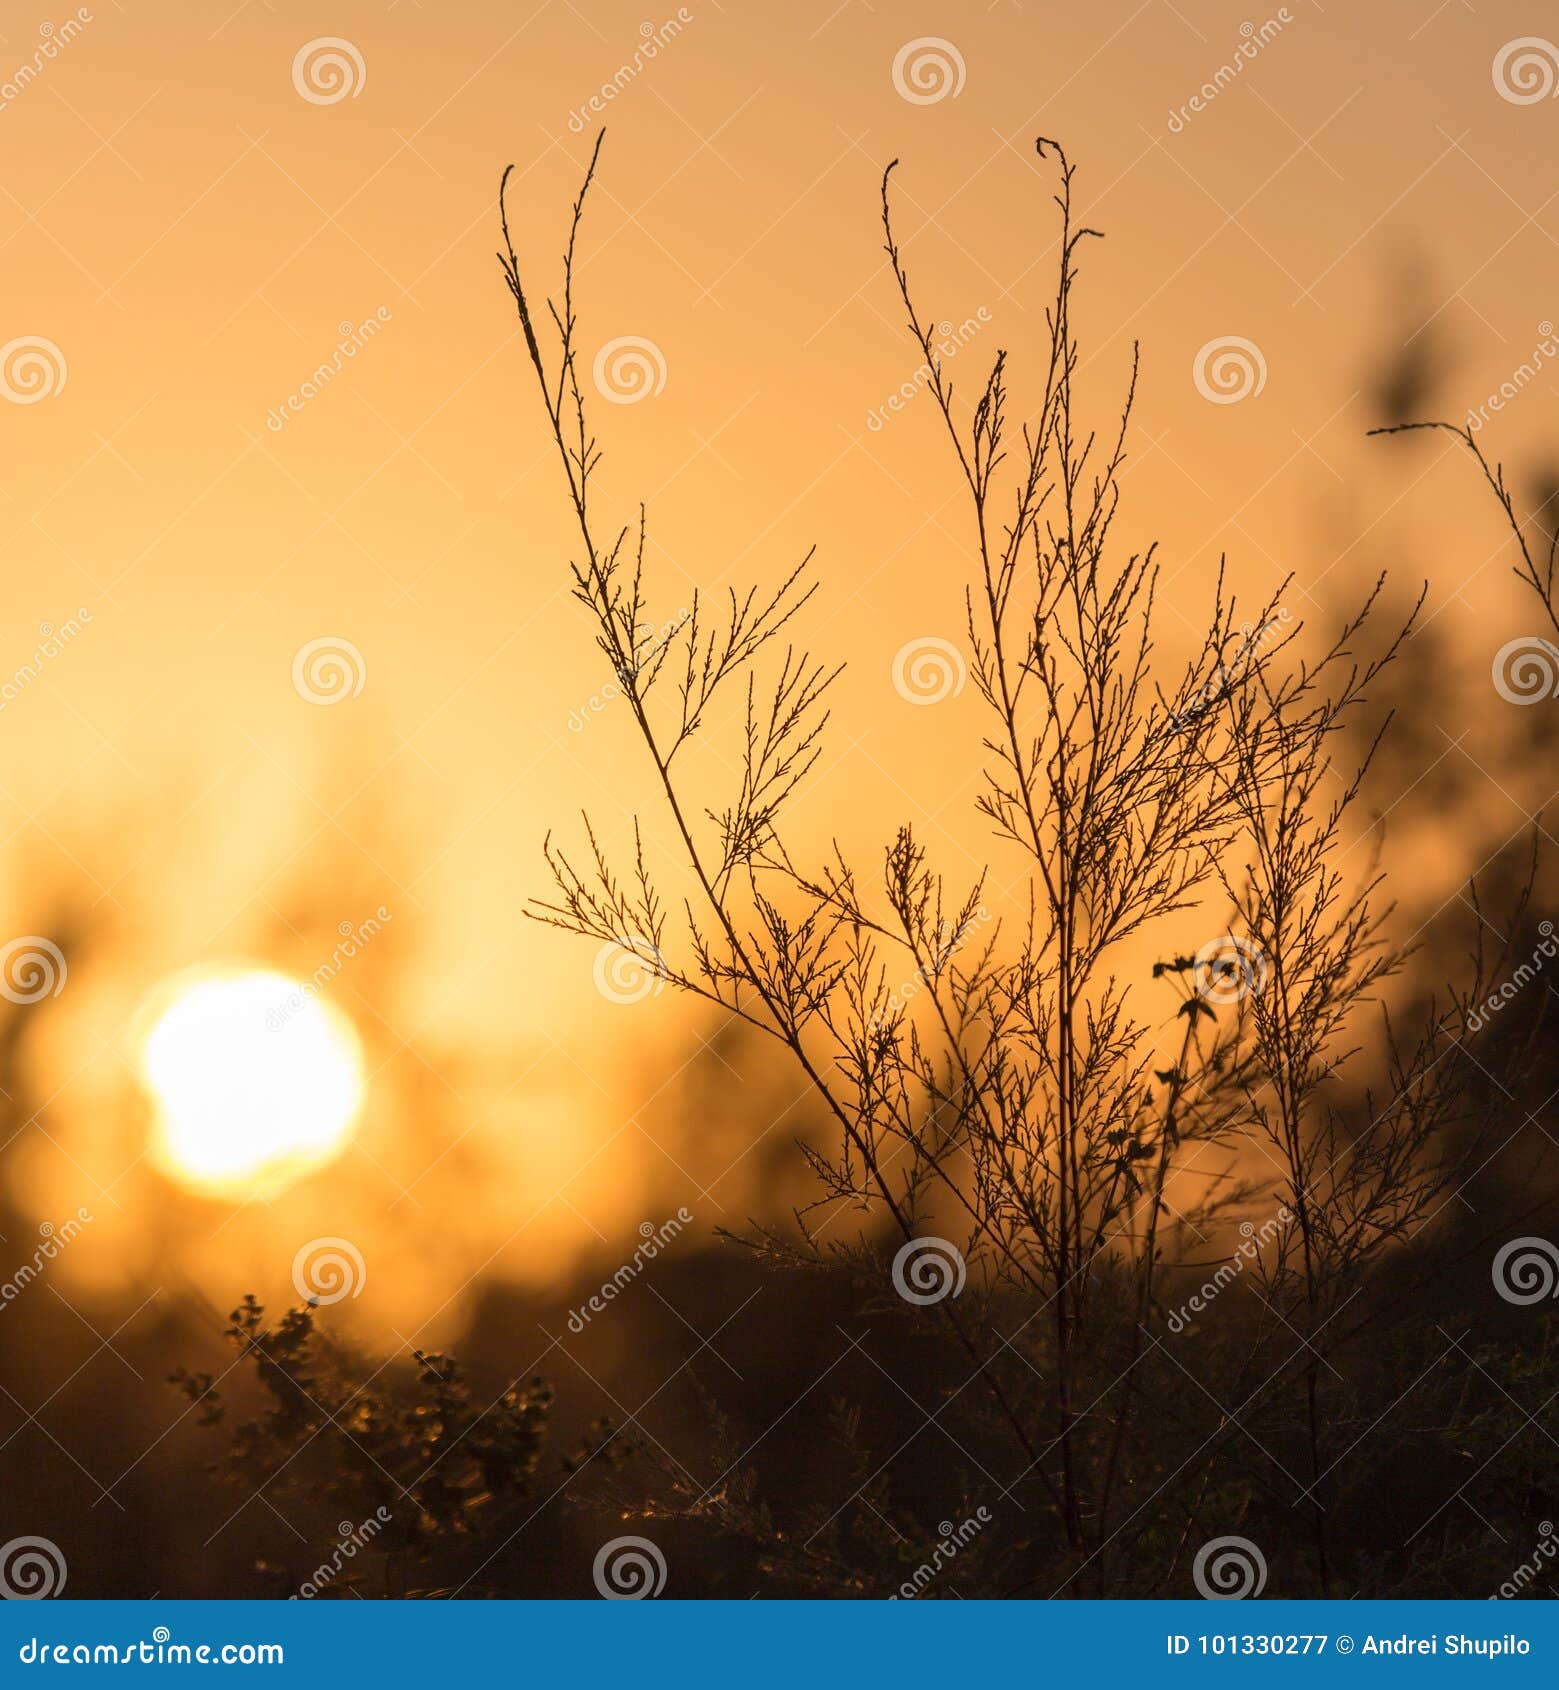 Branches of a Tree at Sunset Stock Image - Image of dawn, limbs: 101330277